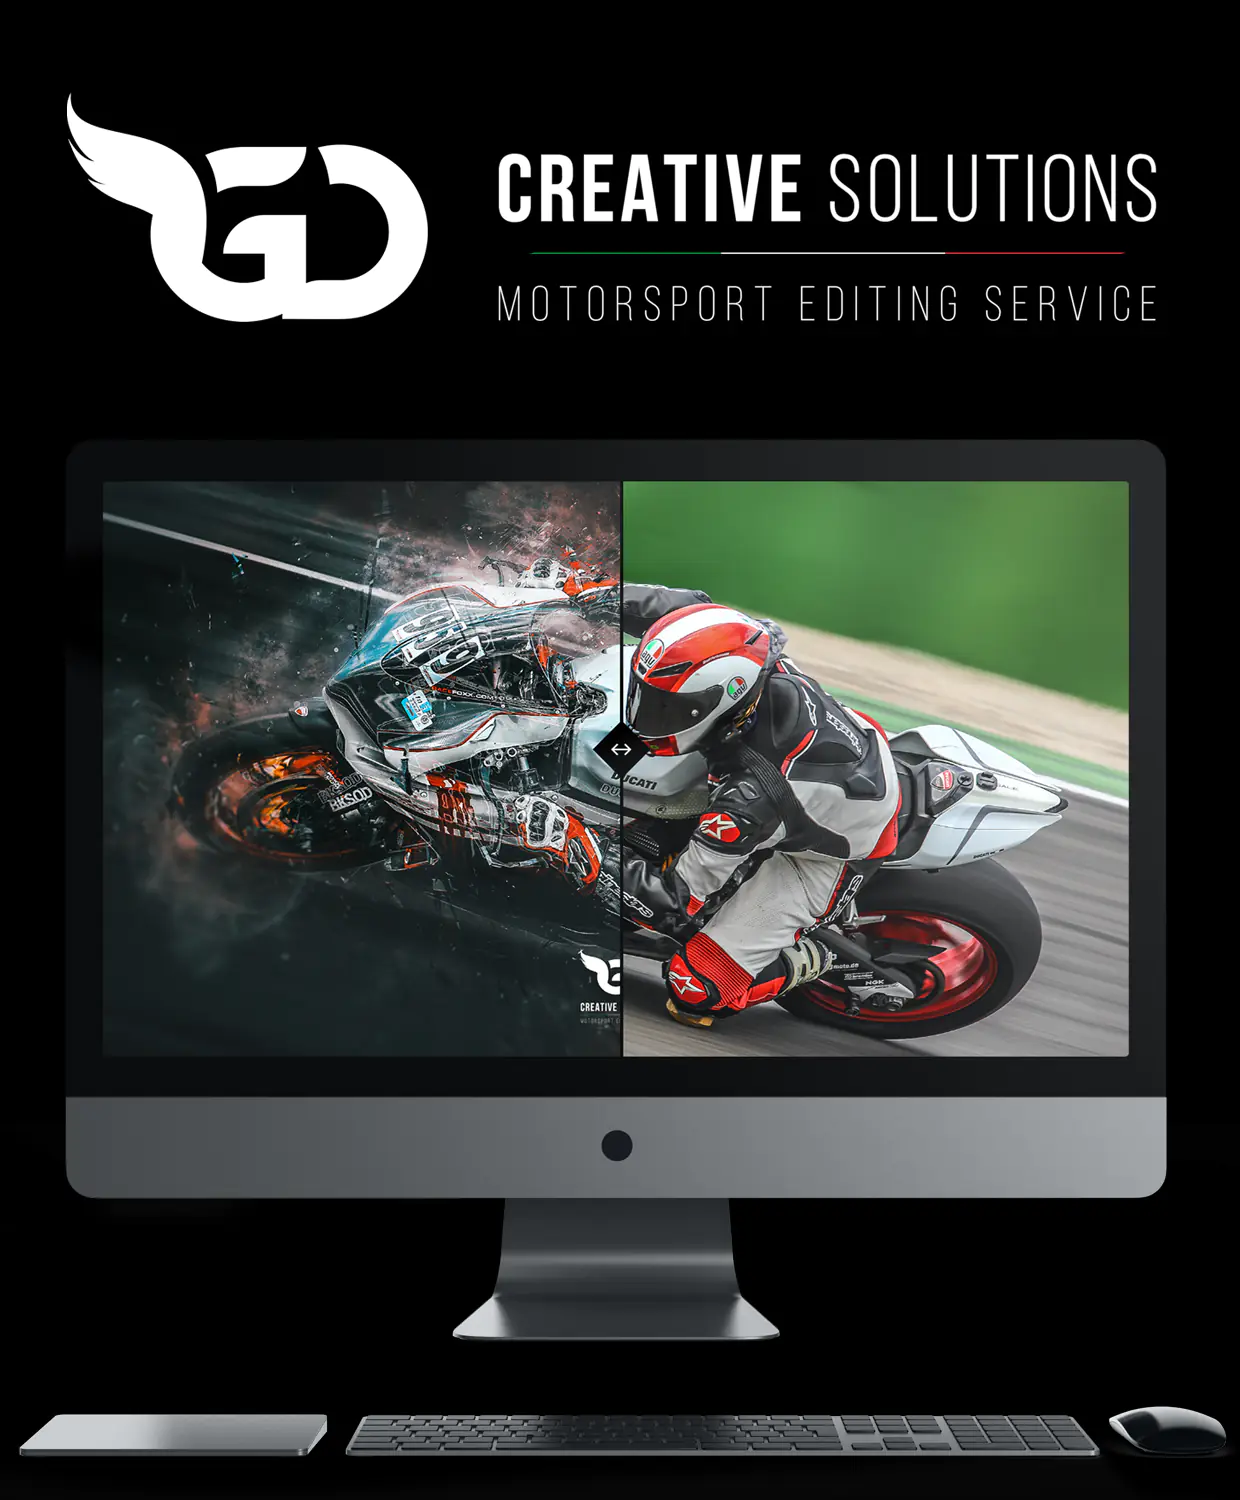 GD CREATIVE SOLUTIONS